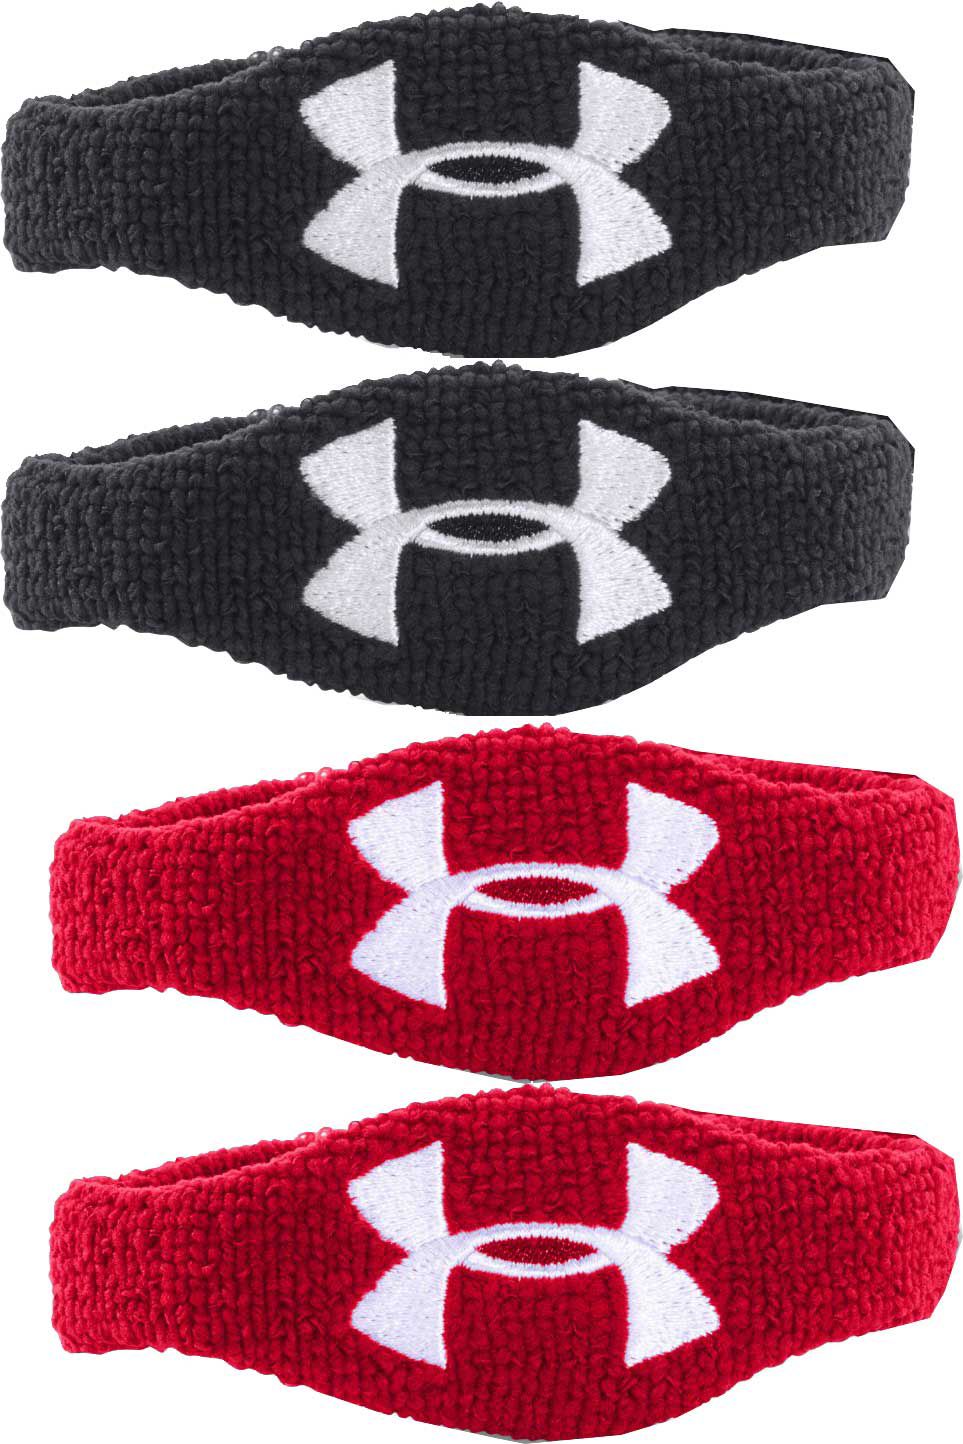 under armour bands